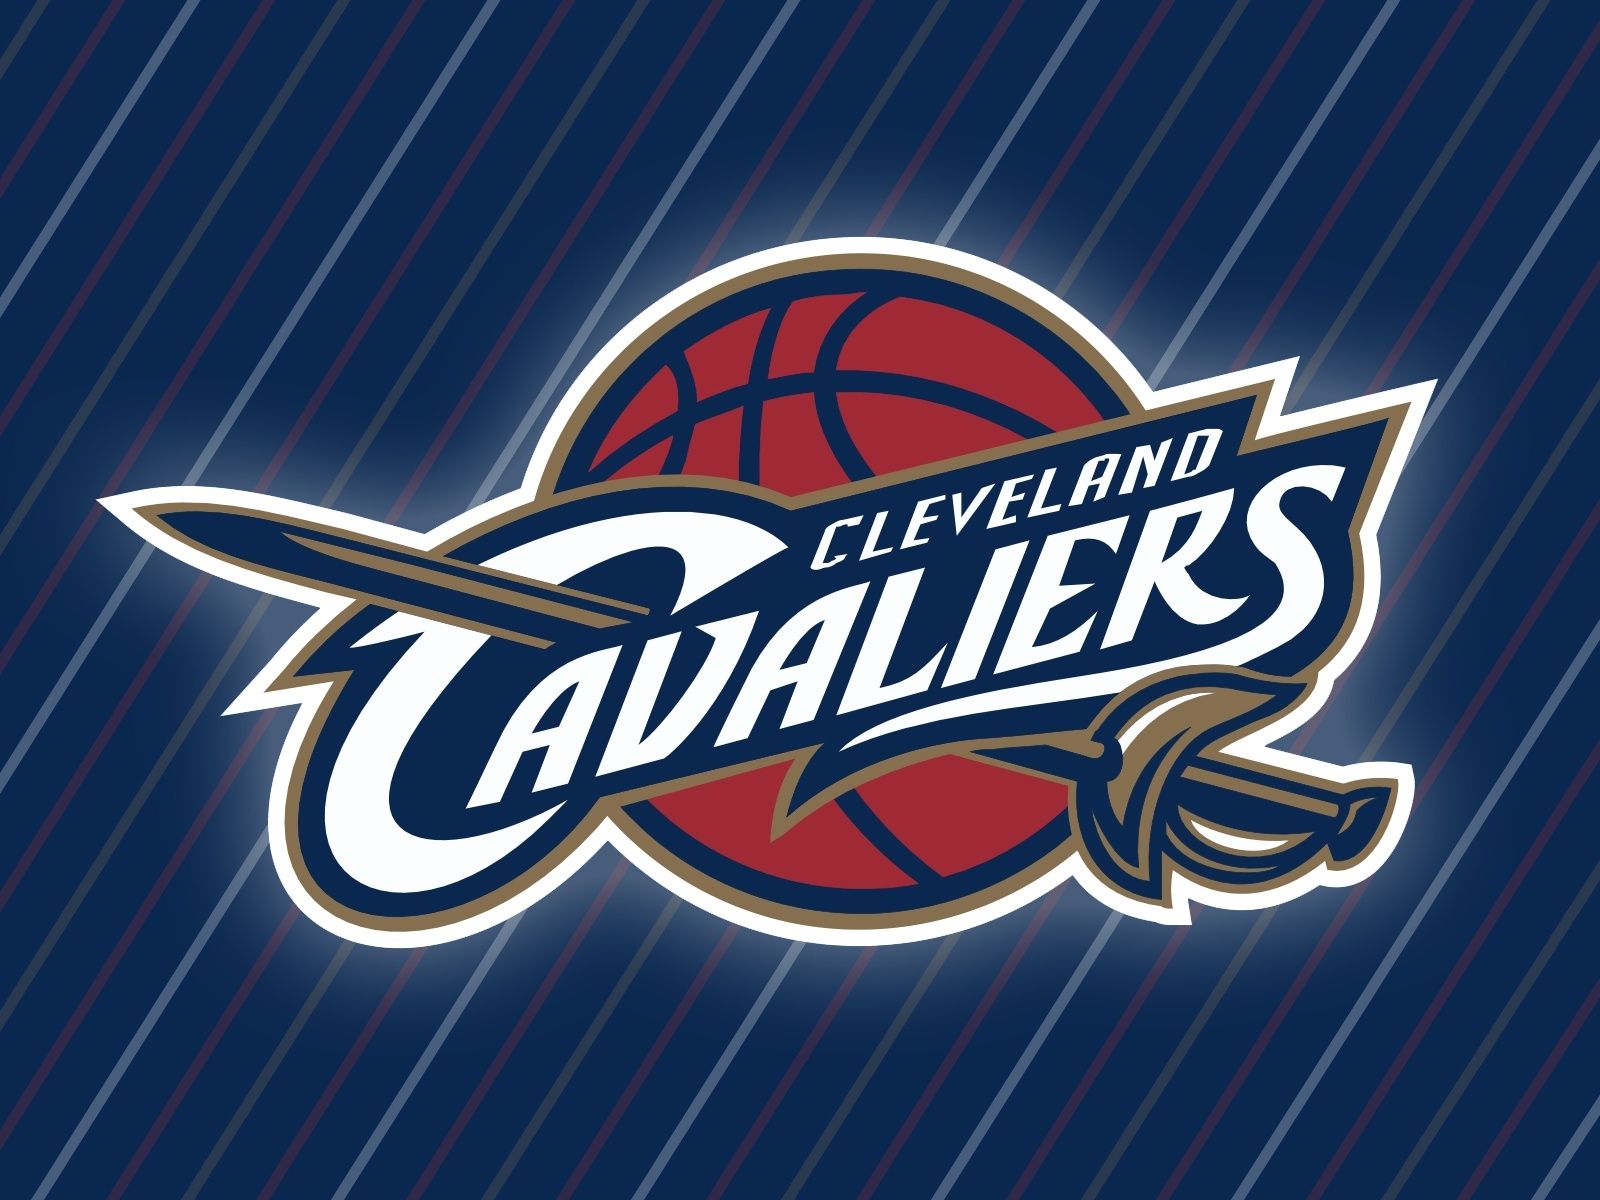 Cleveland Cavaliers Wallpaper | 1600x1200 | ID:25846